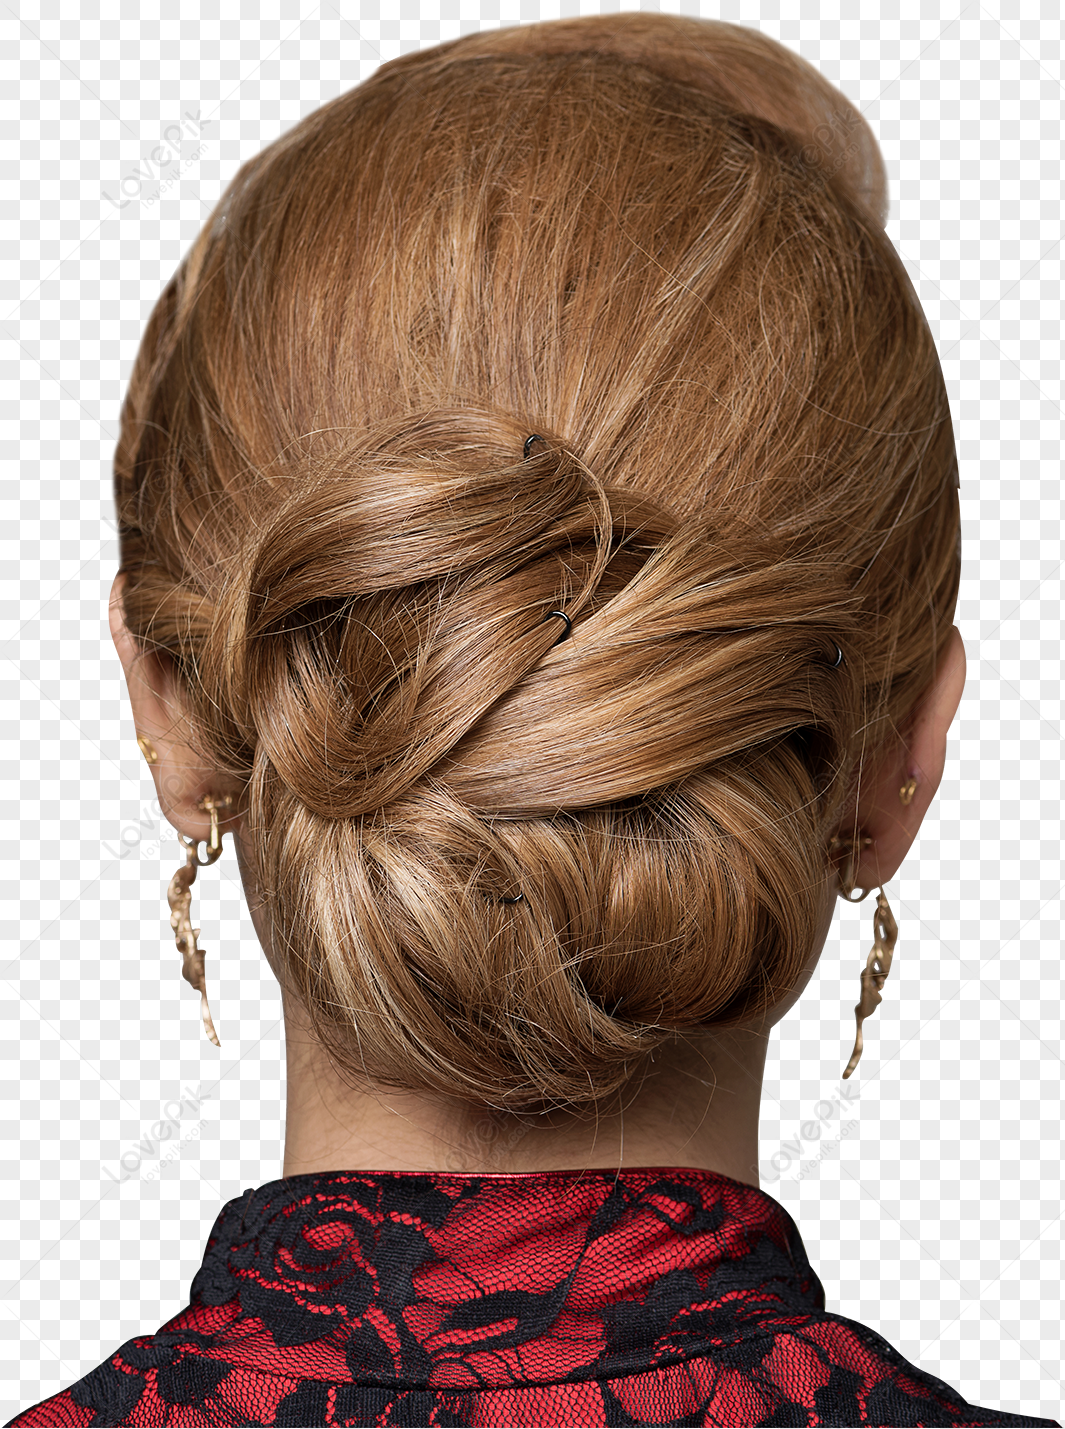 Chinese Hair Style PNG Free Download And Clipart Image For Free Download -  Lovepik | 400302133